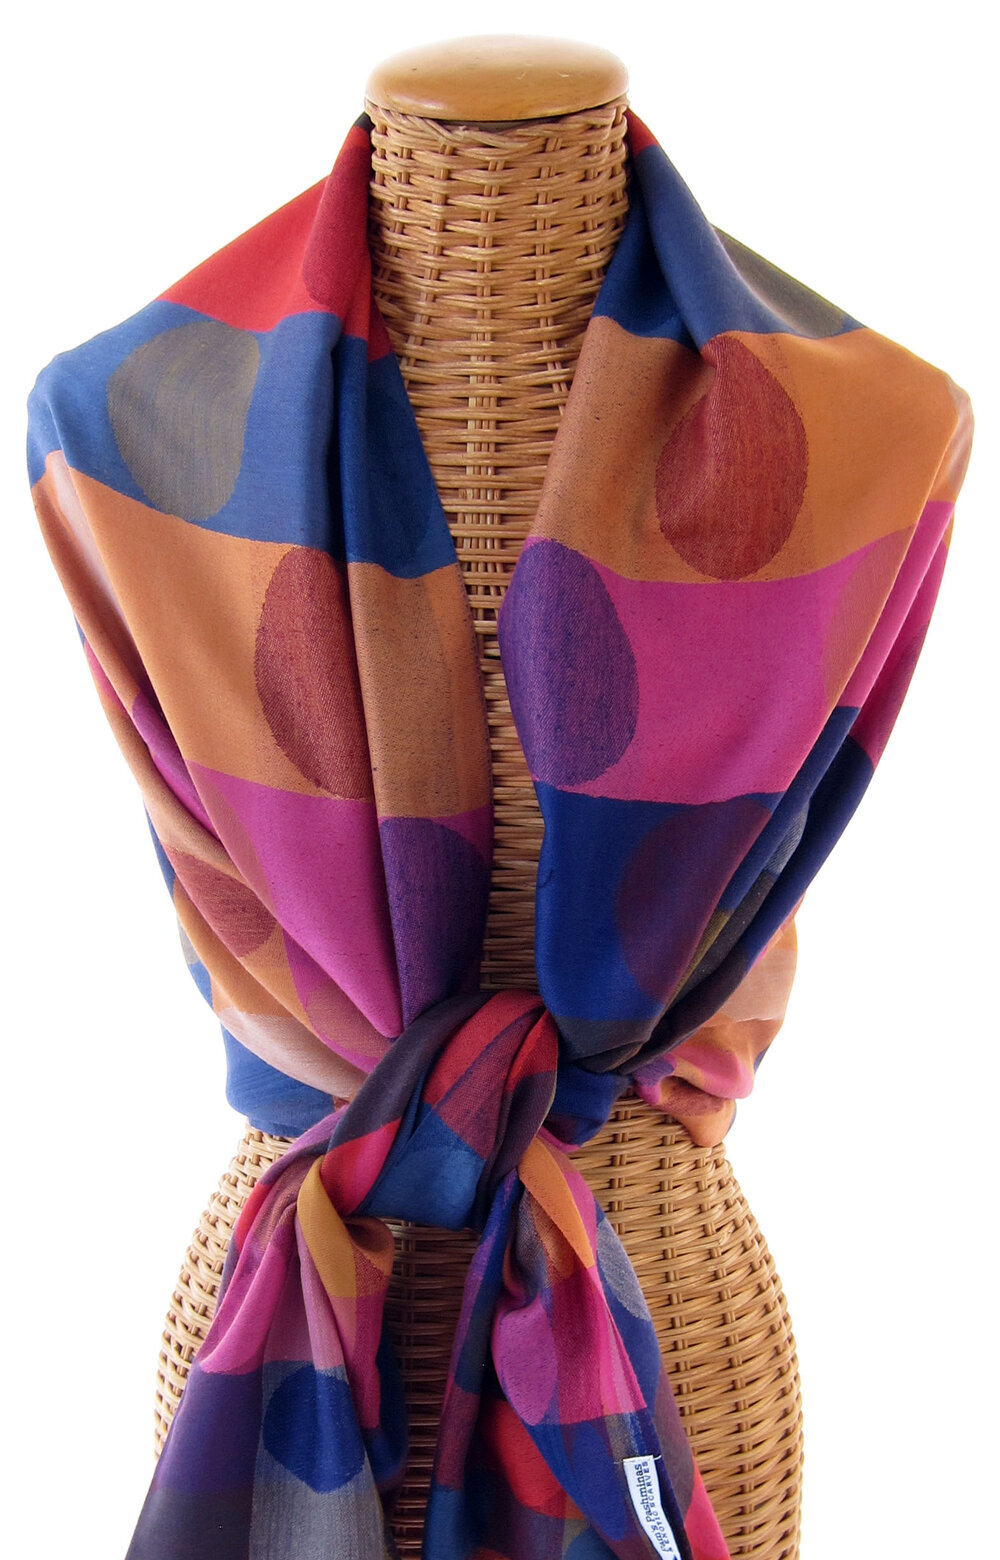 Double Sided Wool Silk Scarf in Brown, Burgundy, Red, Blue Paisley with Geometric Pattern